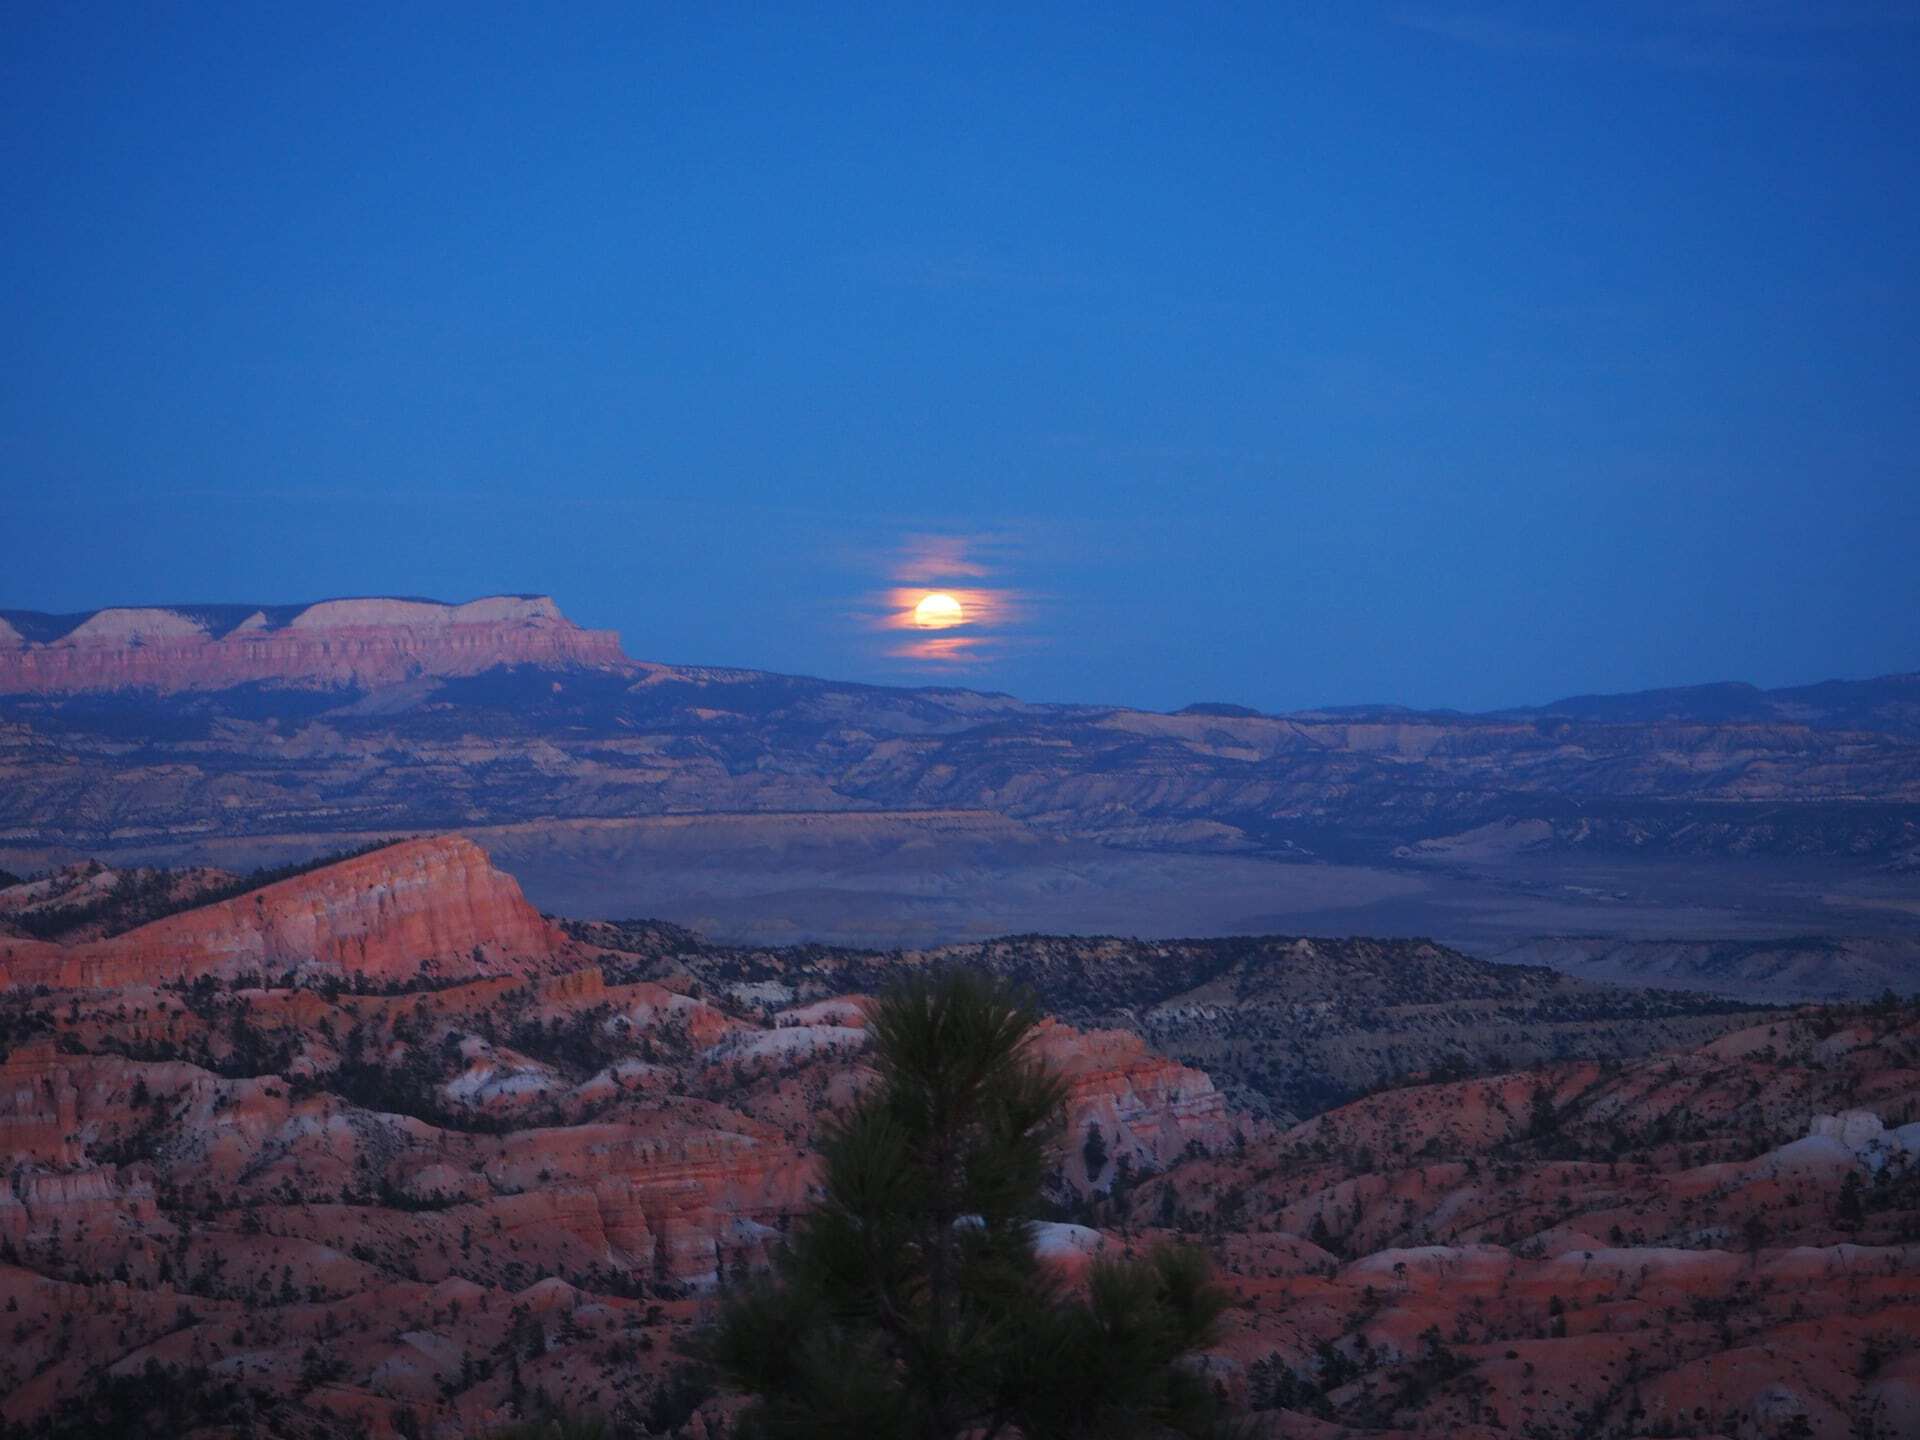 The full moon rising over Bryce Canyon National Park